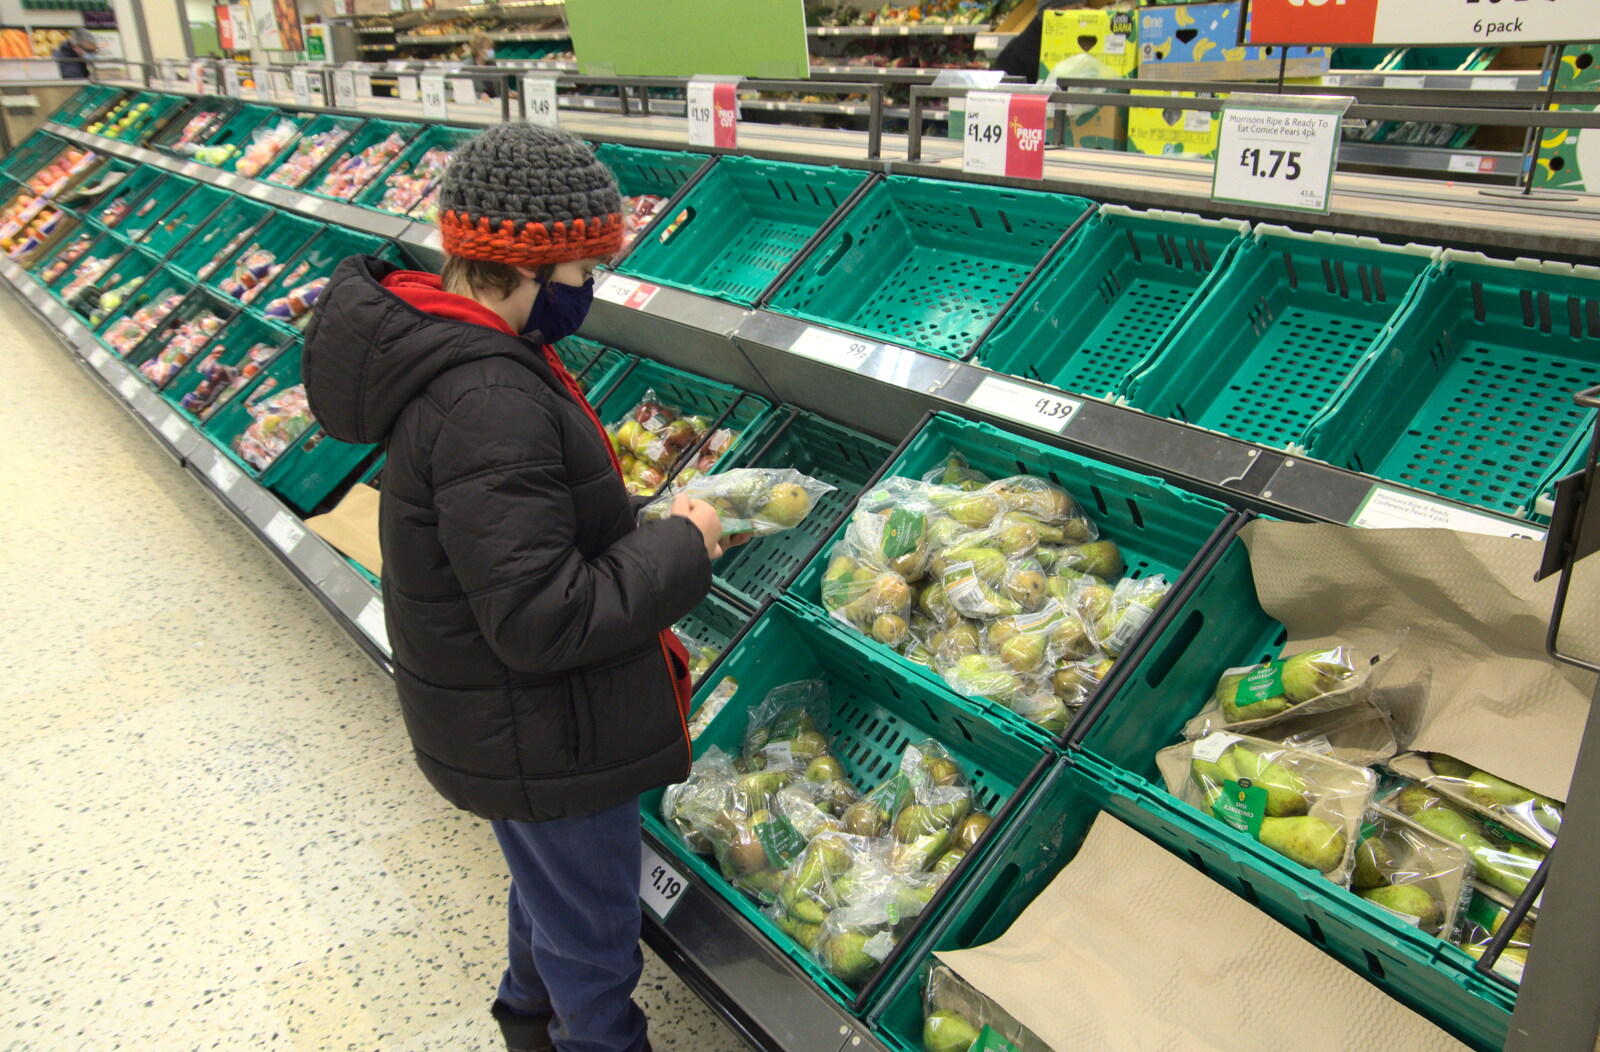 Fred gets some pears in a depleted Morrisons from A Walk Around Redgrave and Lopham Fen, Redgrave, Suffolk - 3rd January 2021